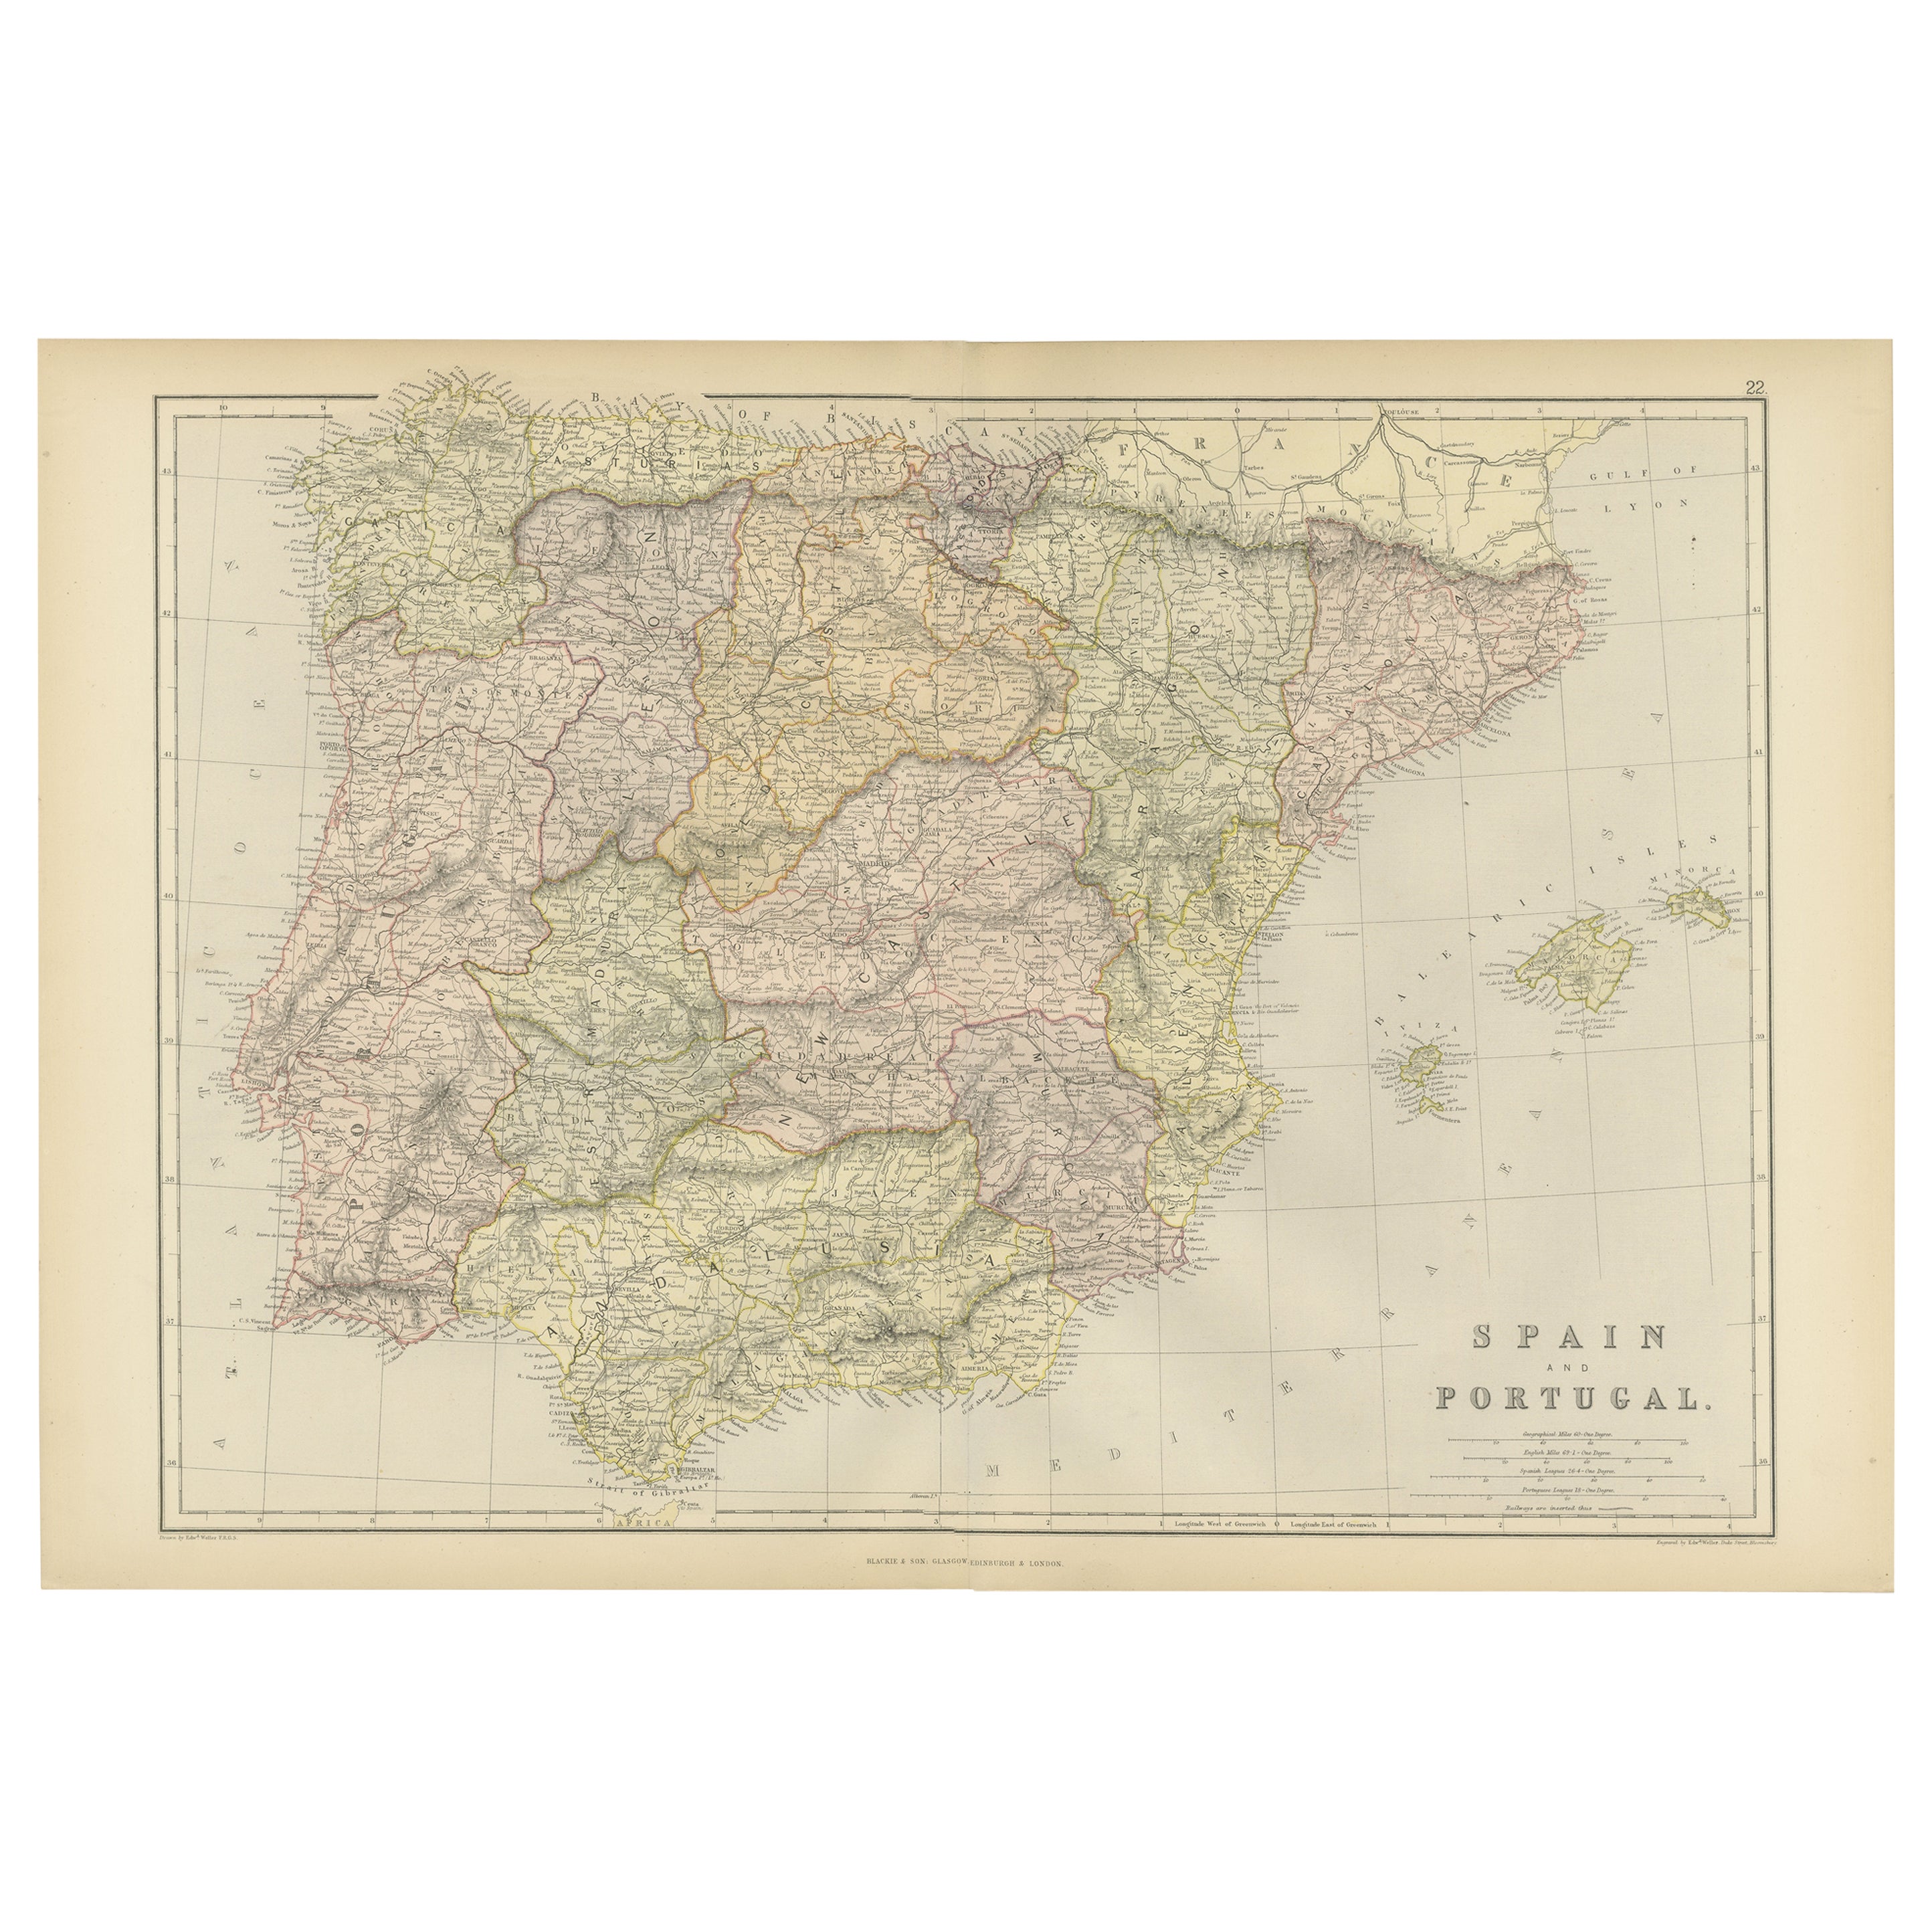 Original Antique Map of Spain and Portugal, 1882